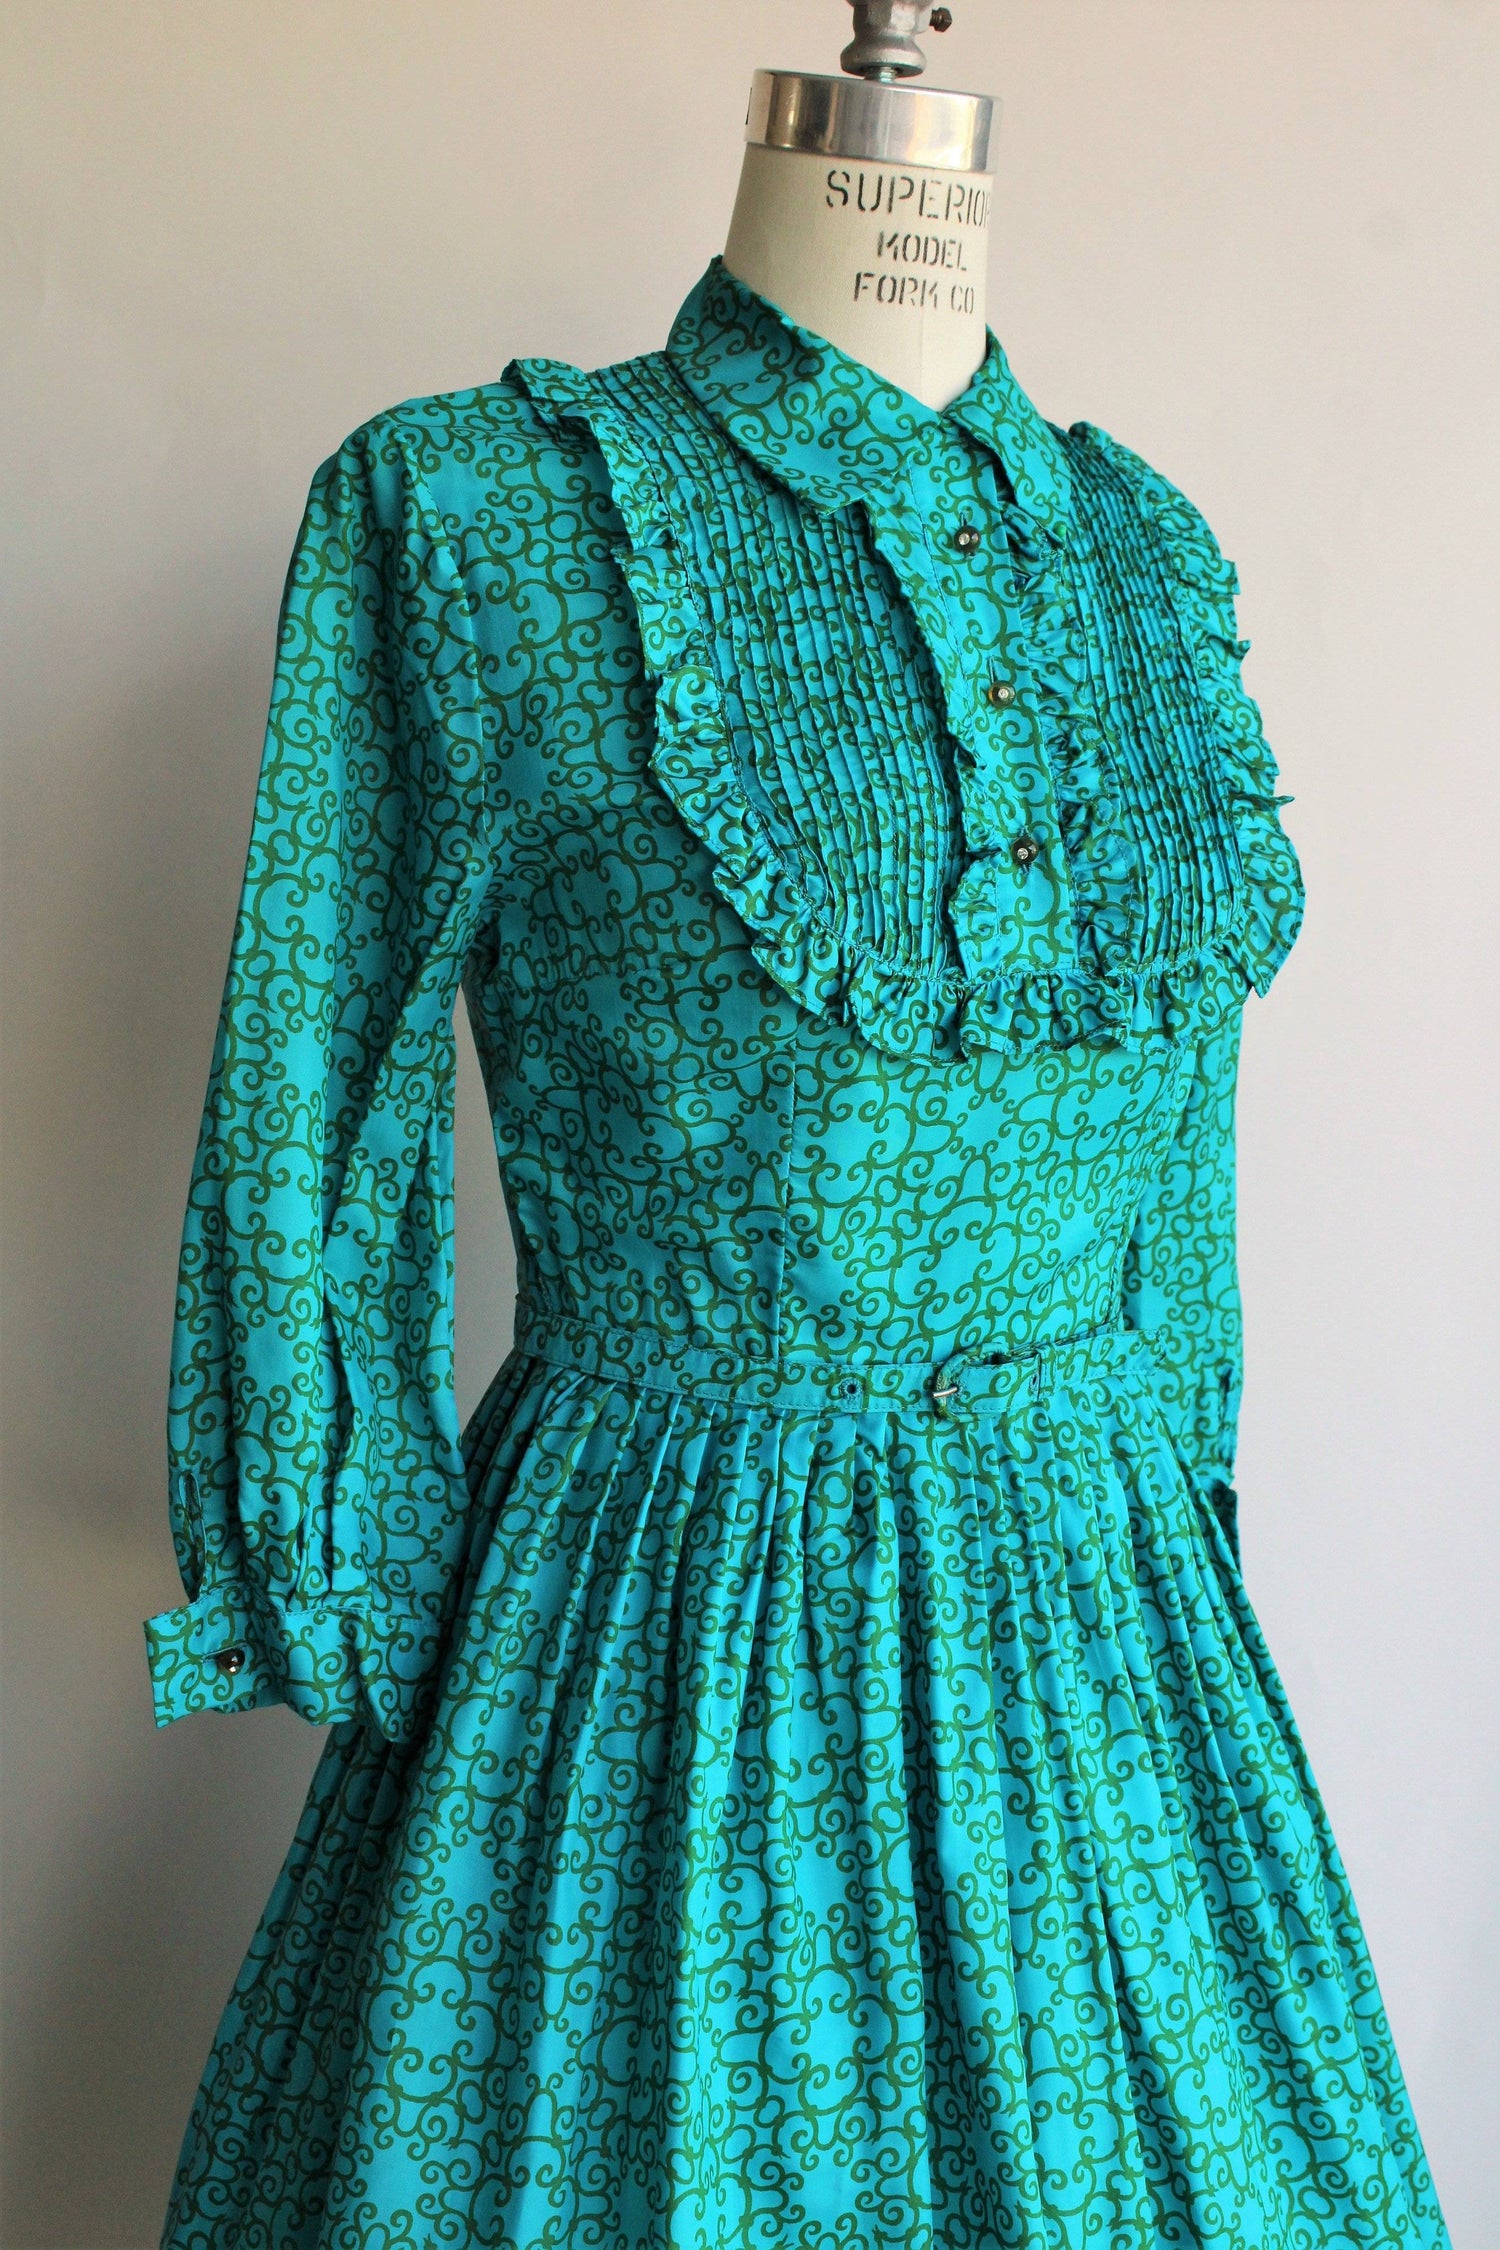 Vintage 1950s 1960s Blue and Green Dress With Belt and Tuxedo Front